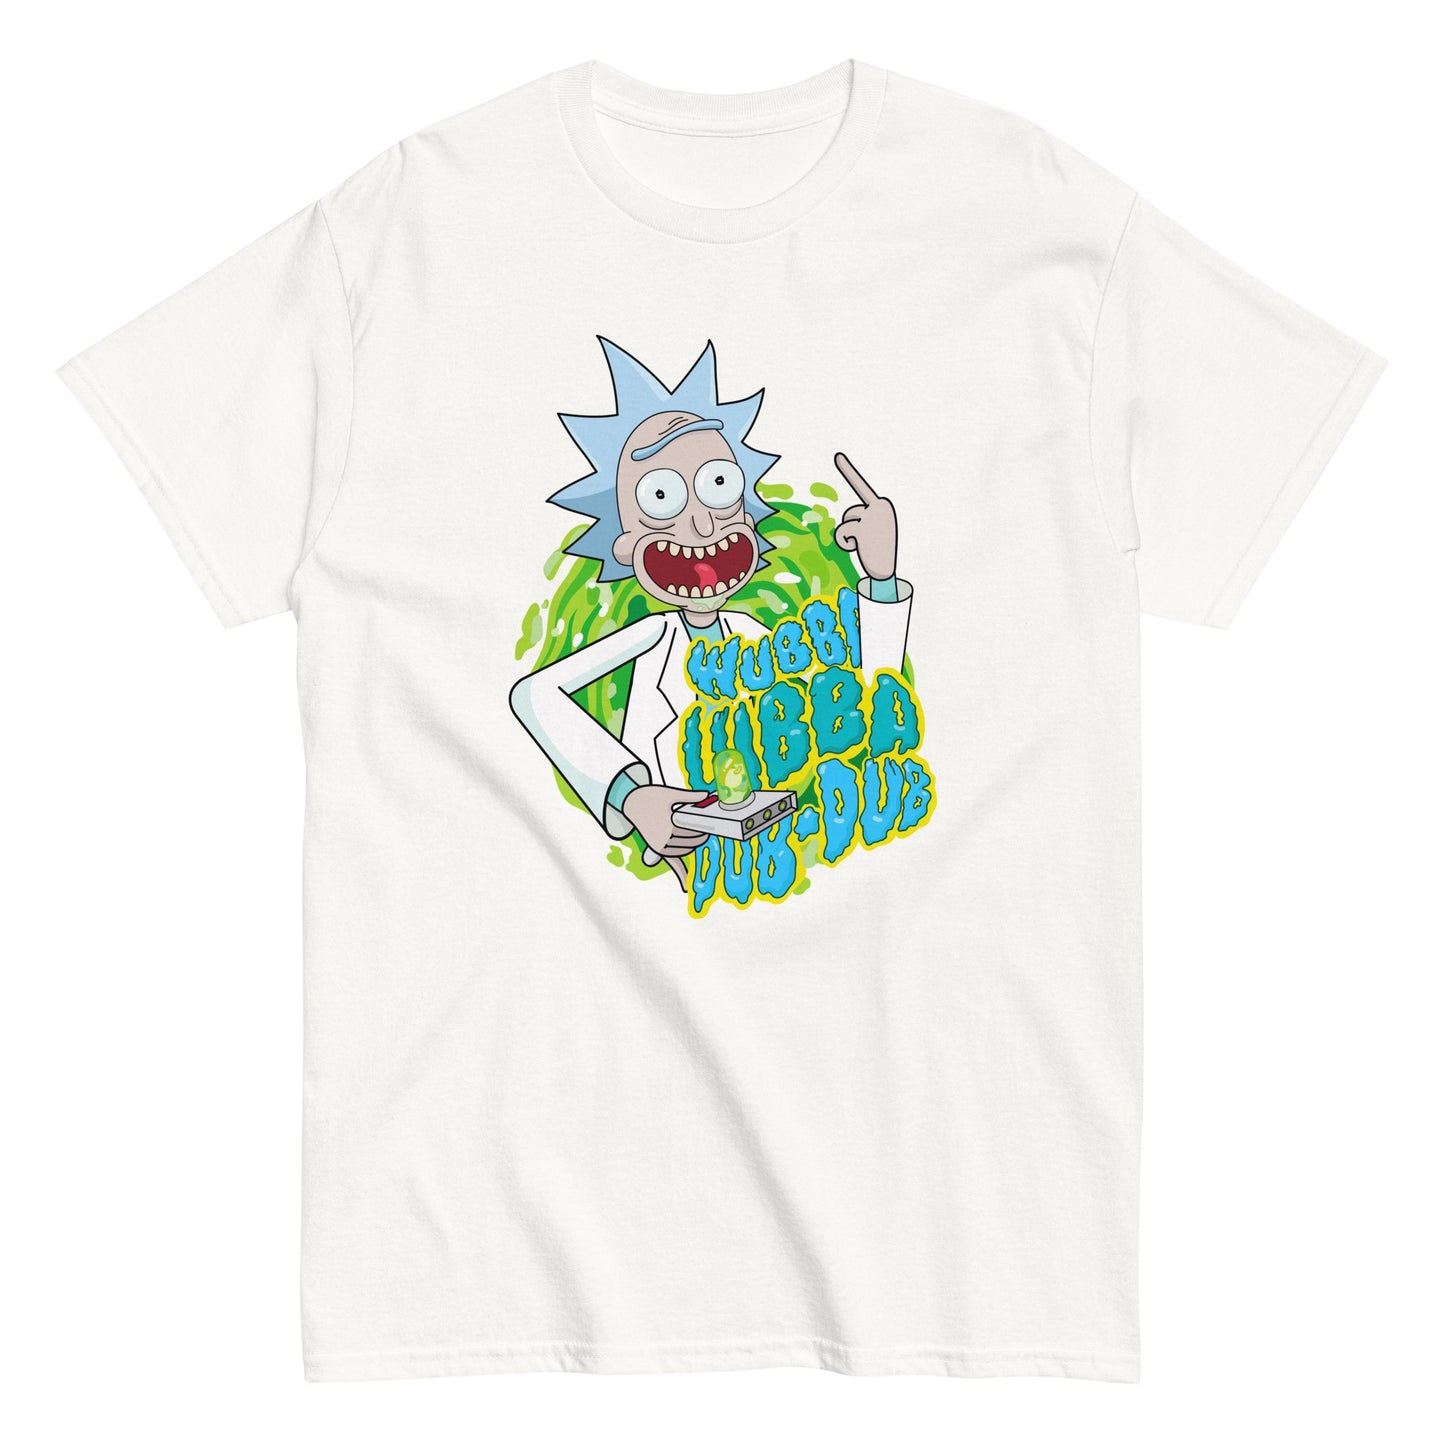 Get Schwifty in Style with Our Exclusive Rick and Morty Graphic Tees - The Truth Graphics